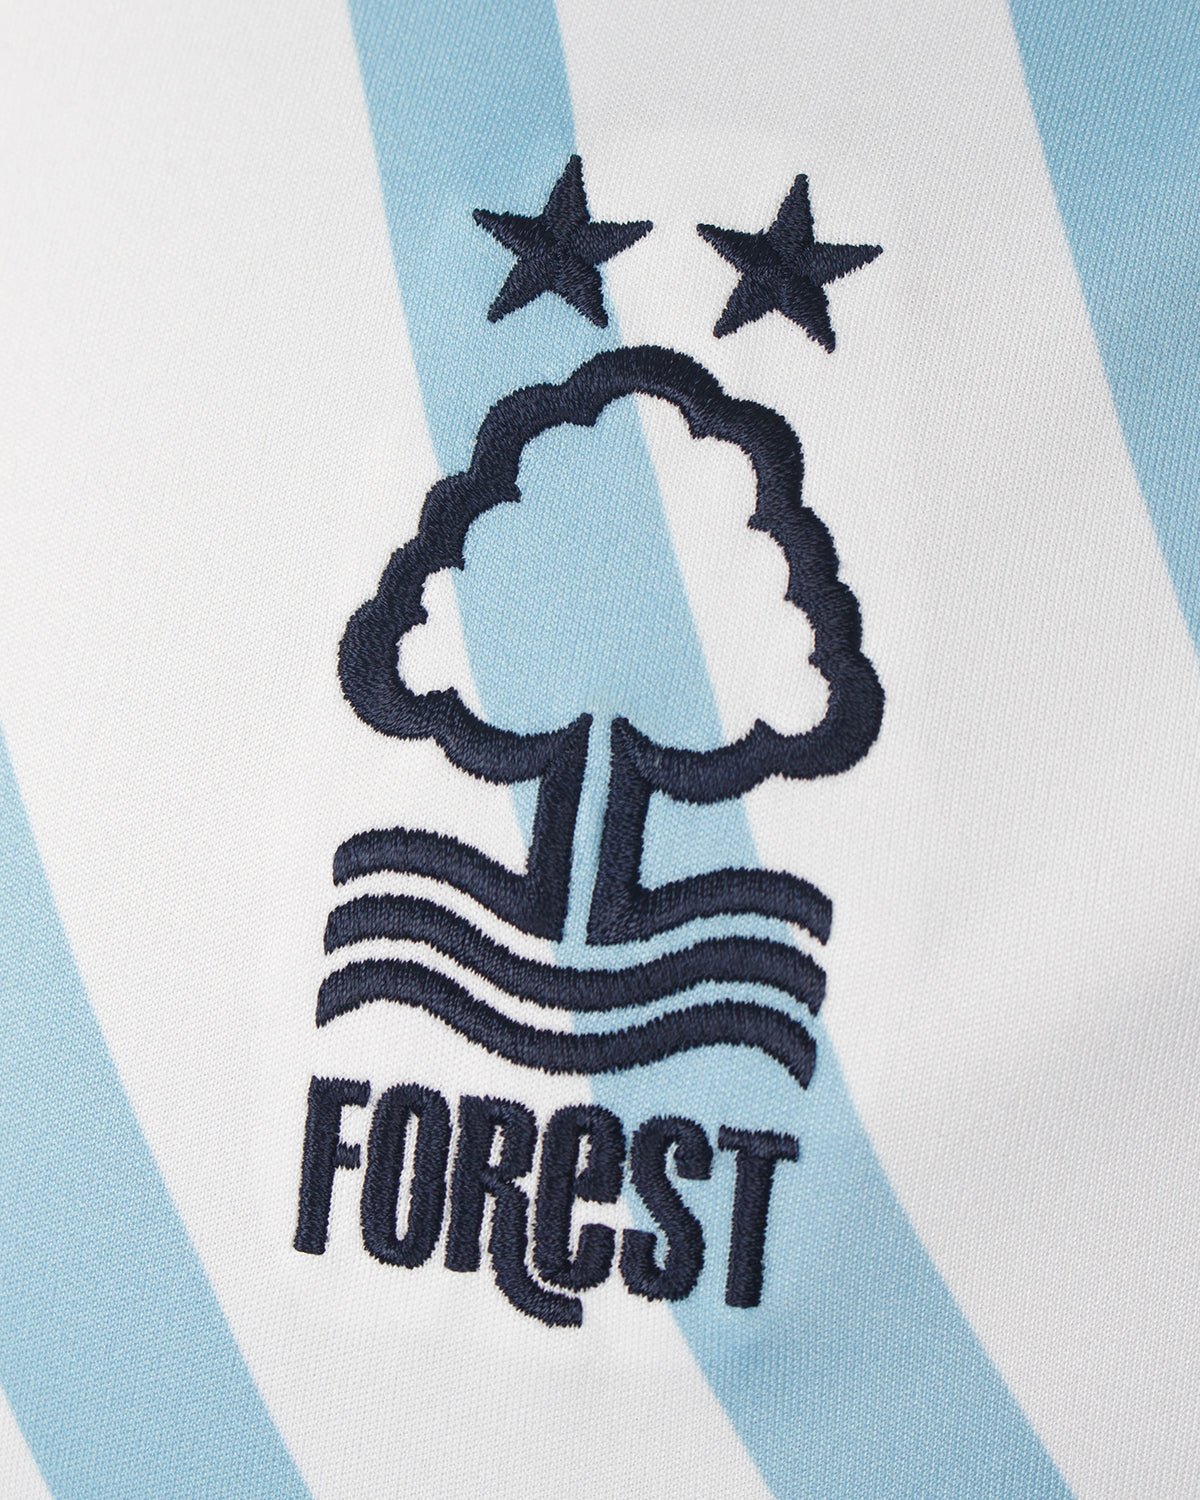 NFFC Away Shirt 23-24 - Toffolo 15 - Nottingham Forest FC